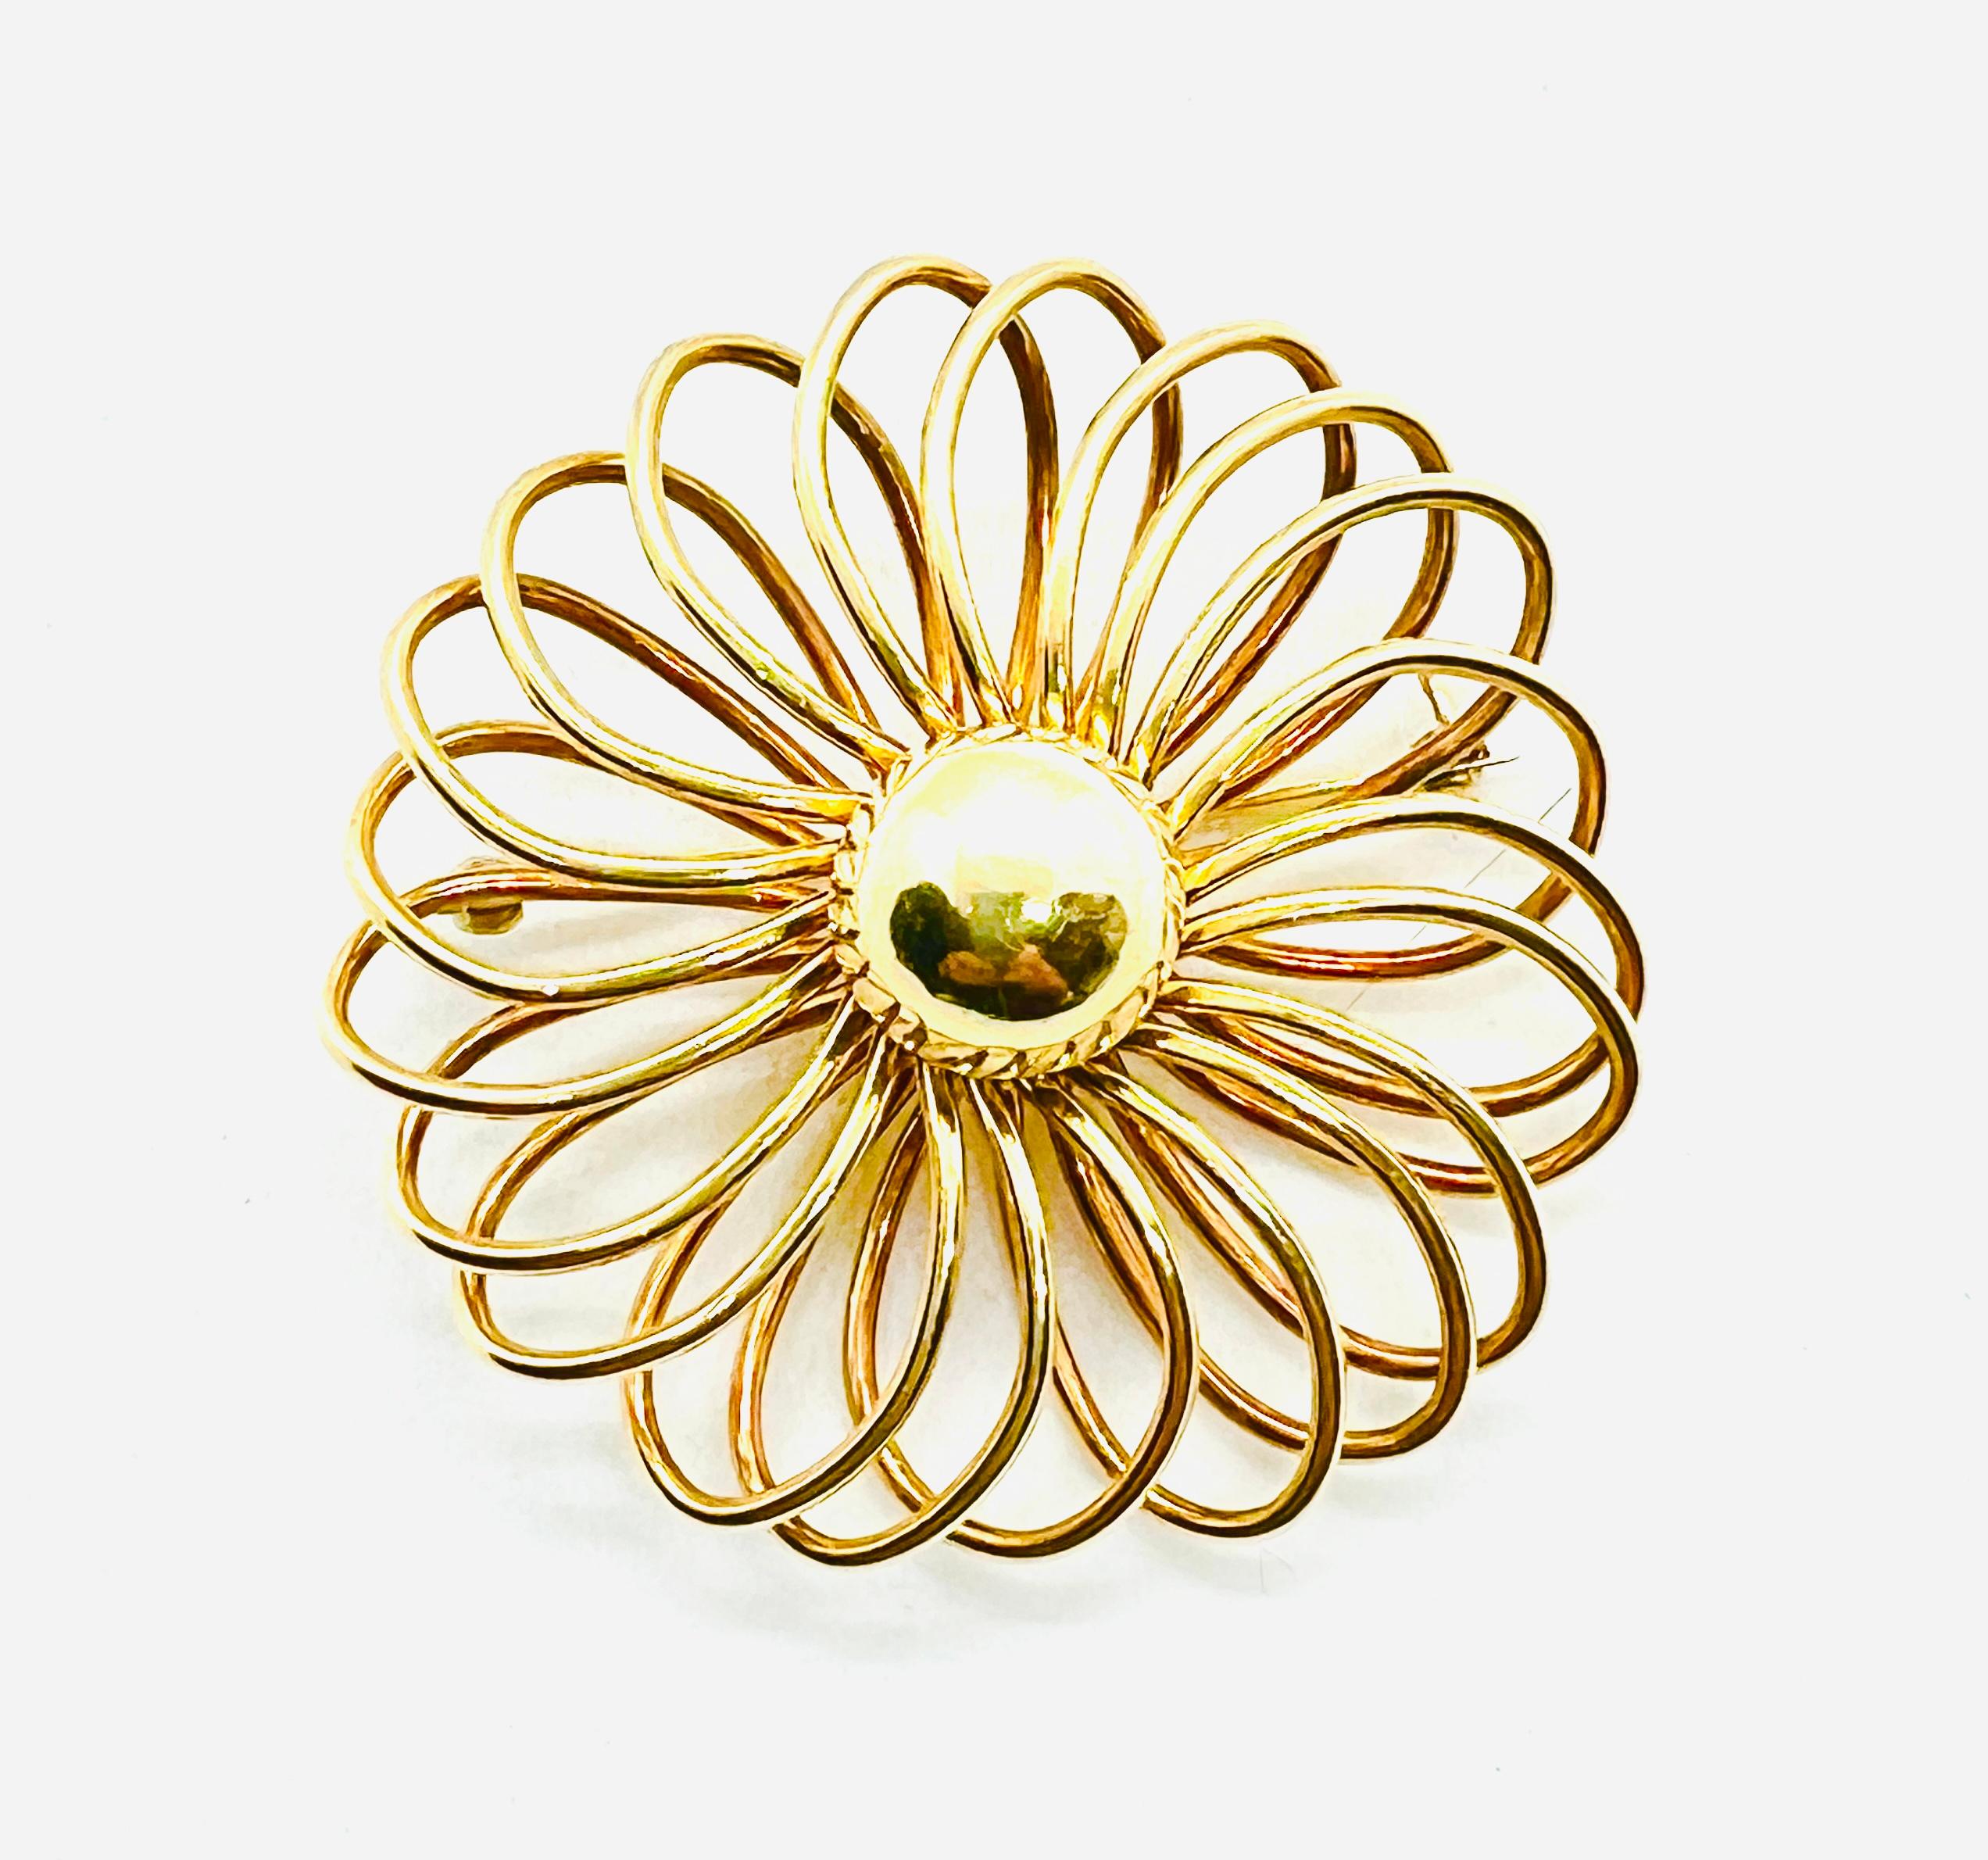 Gorgeous Vintage Cartier Spiral Design Brooch. Made in 14k Yellow Gold it measures 53mm in diameter and weighs 22.8 grams. This floral inspired piece is lovely and very easy to wear. Stamped 